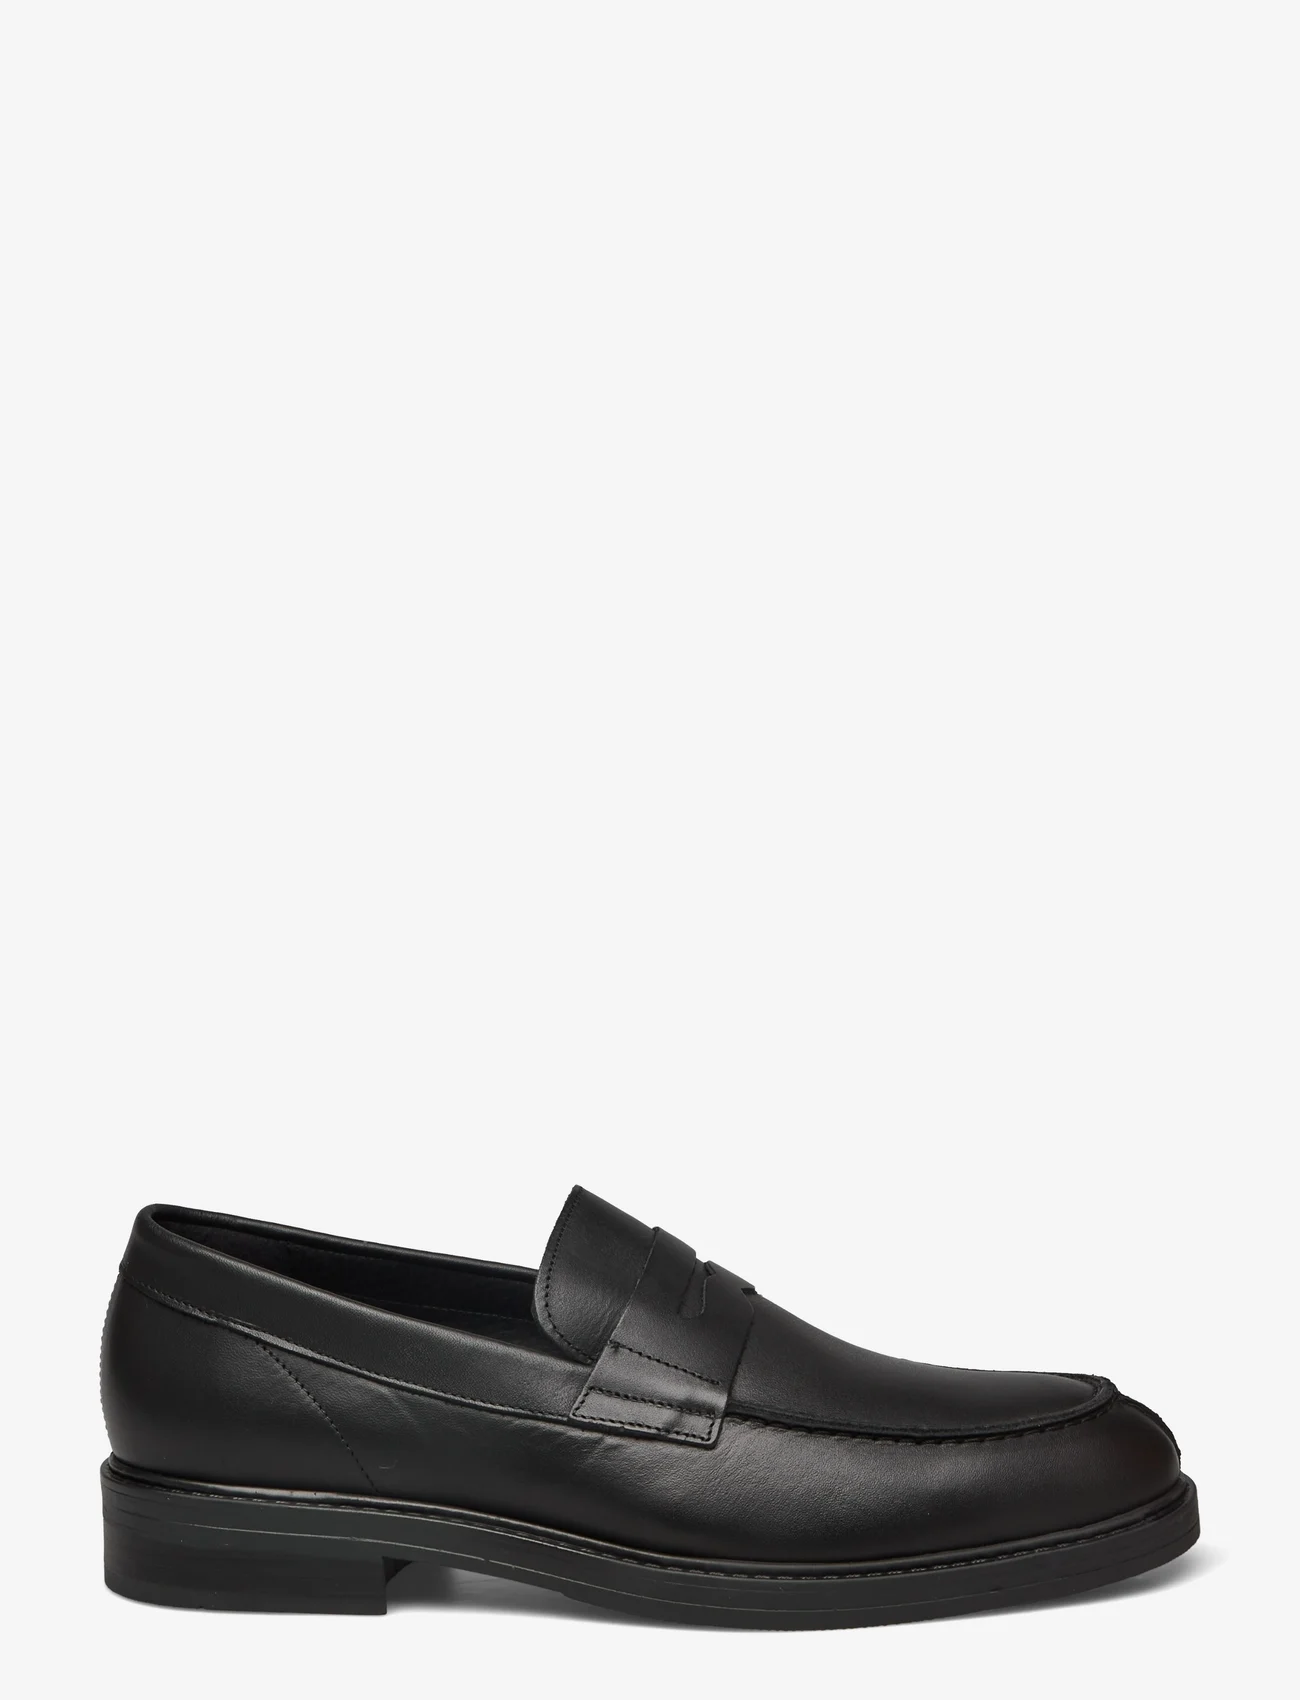 Selected Homme - SLHBLAKE LEATHER PENNY LOAFER - buty wiosenne - black - 1